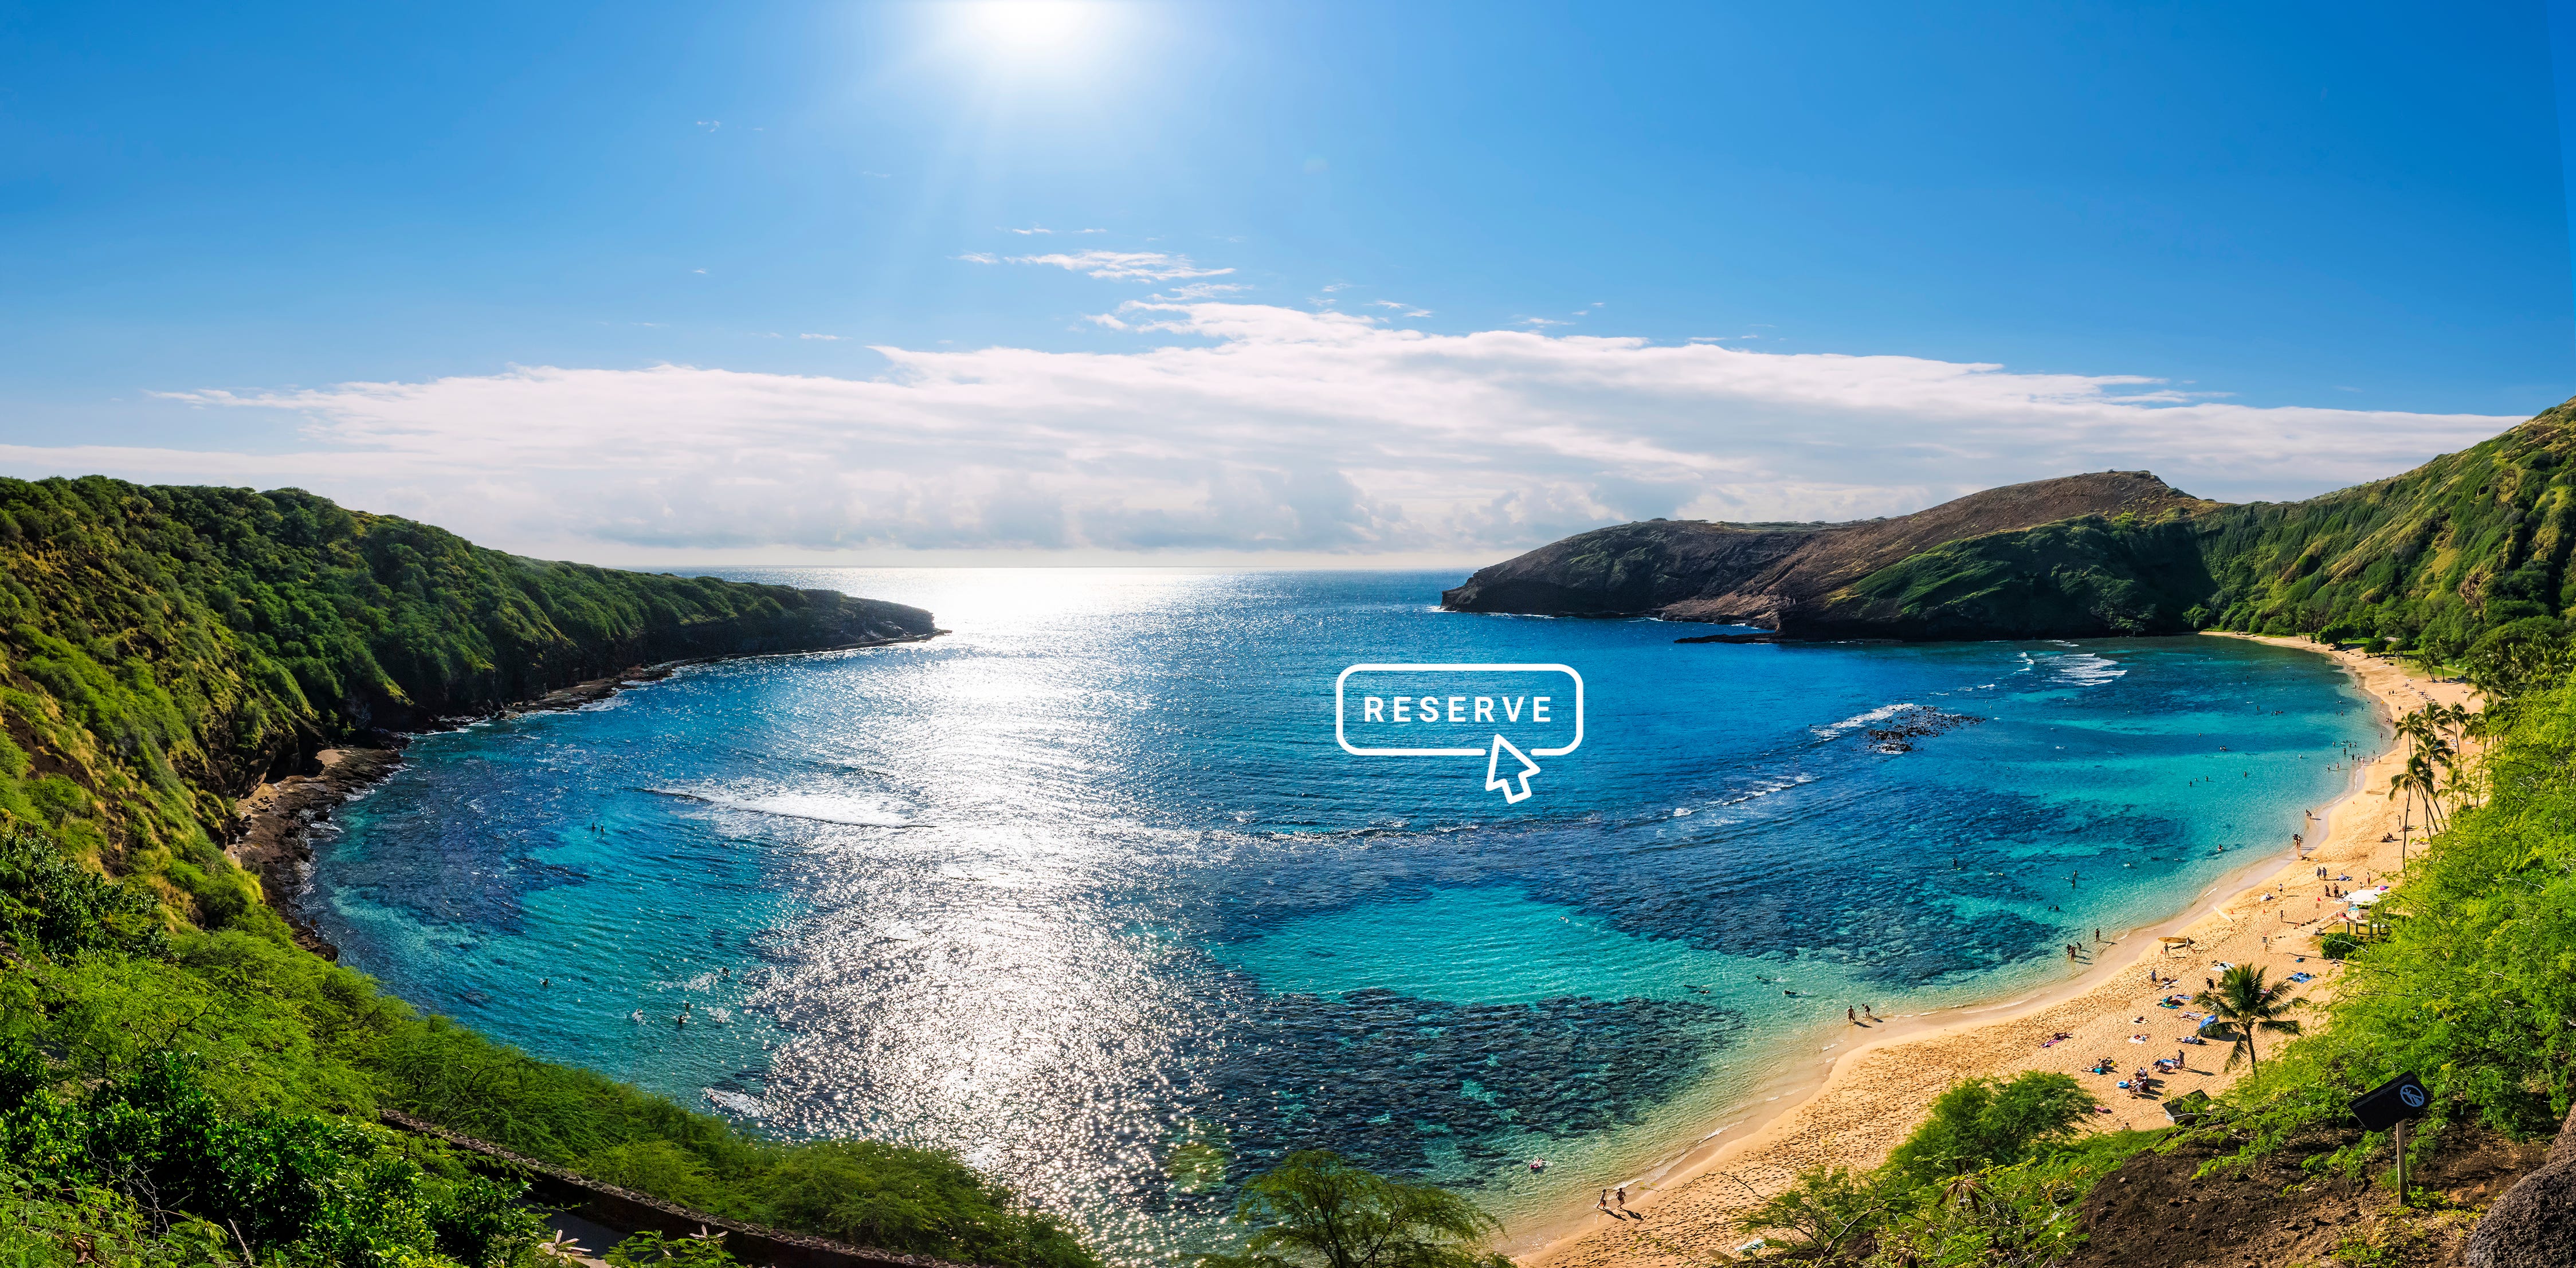 To manage over tourism, are reservation systems the future of traveling to Hawaii?